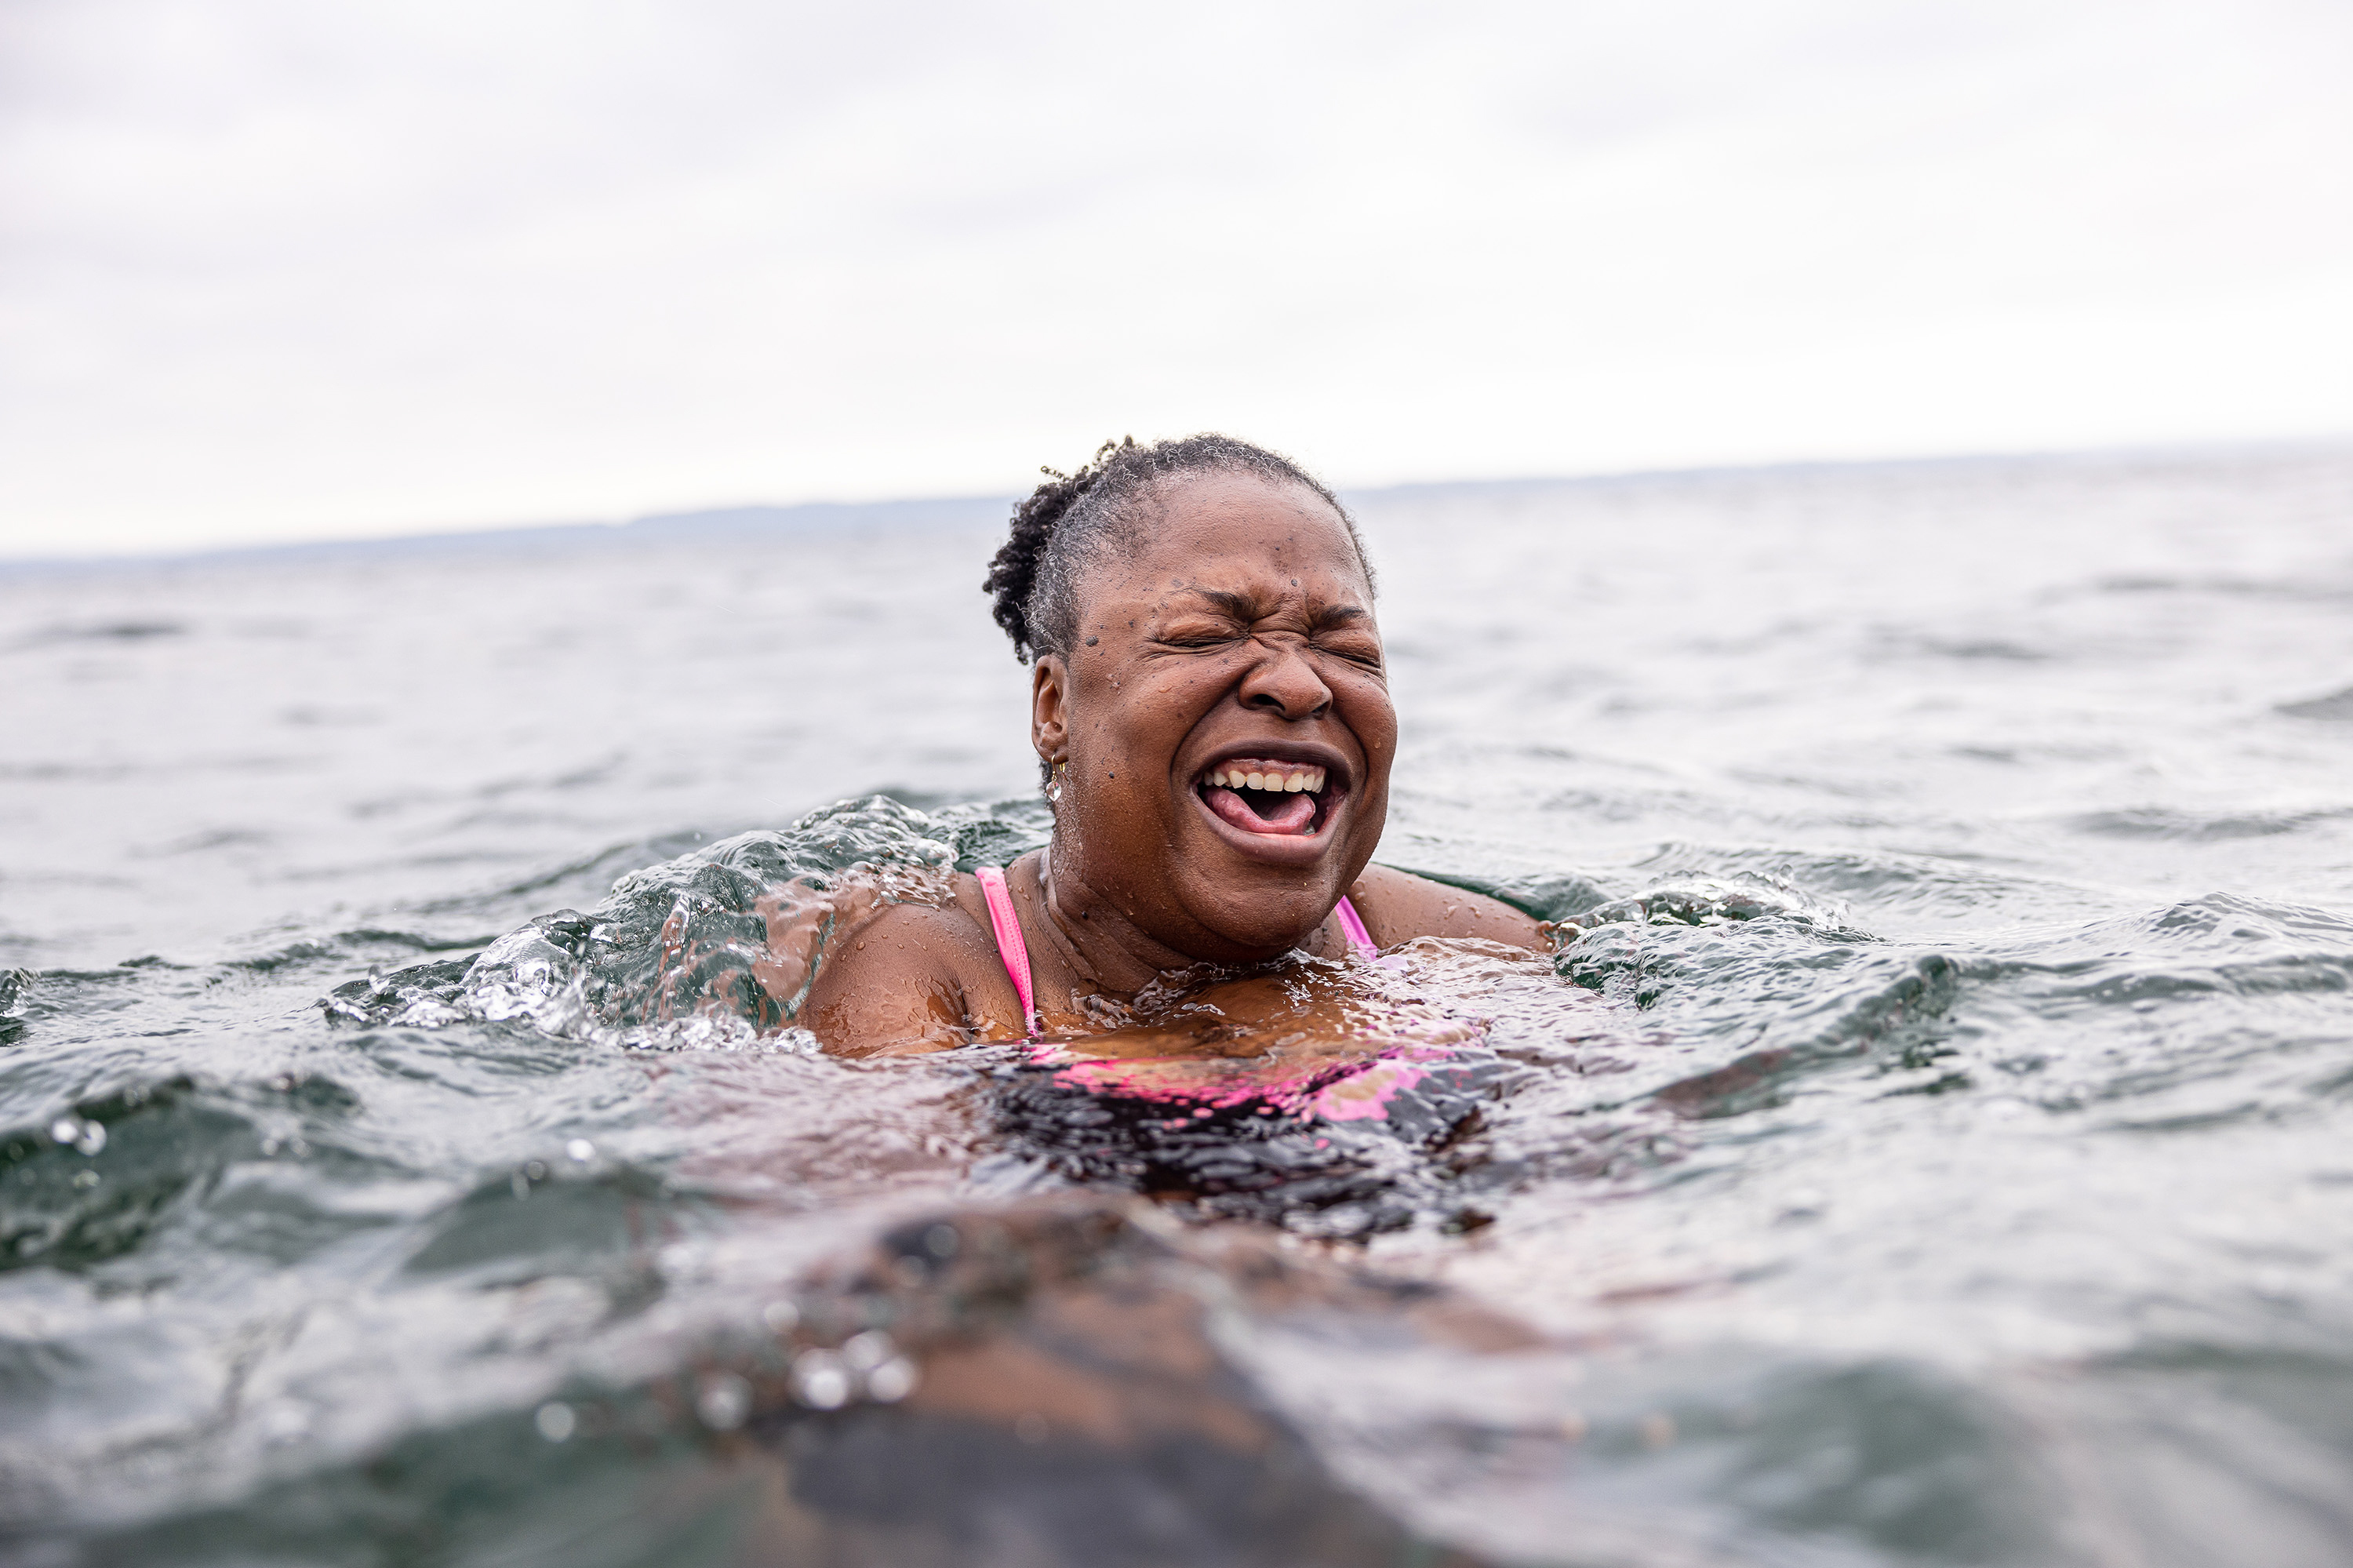 Ready to cold plunge? We dive into the science to see if it's worth it - OPB